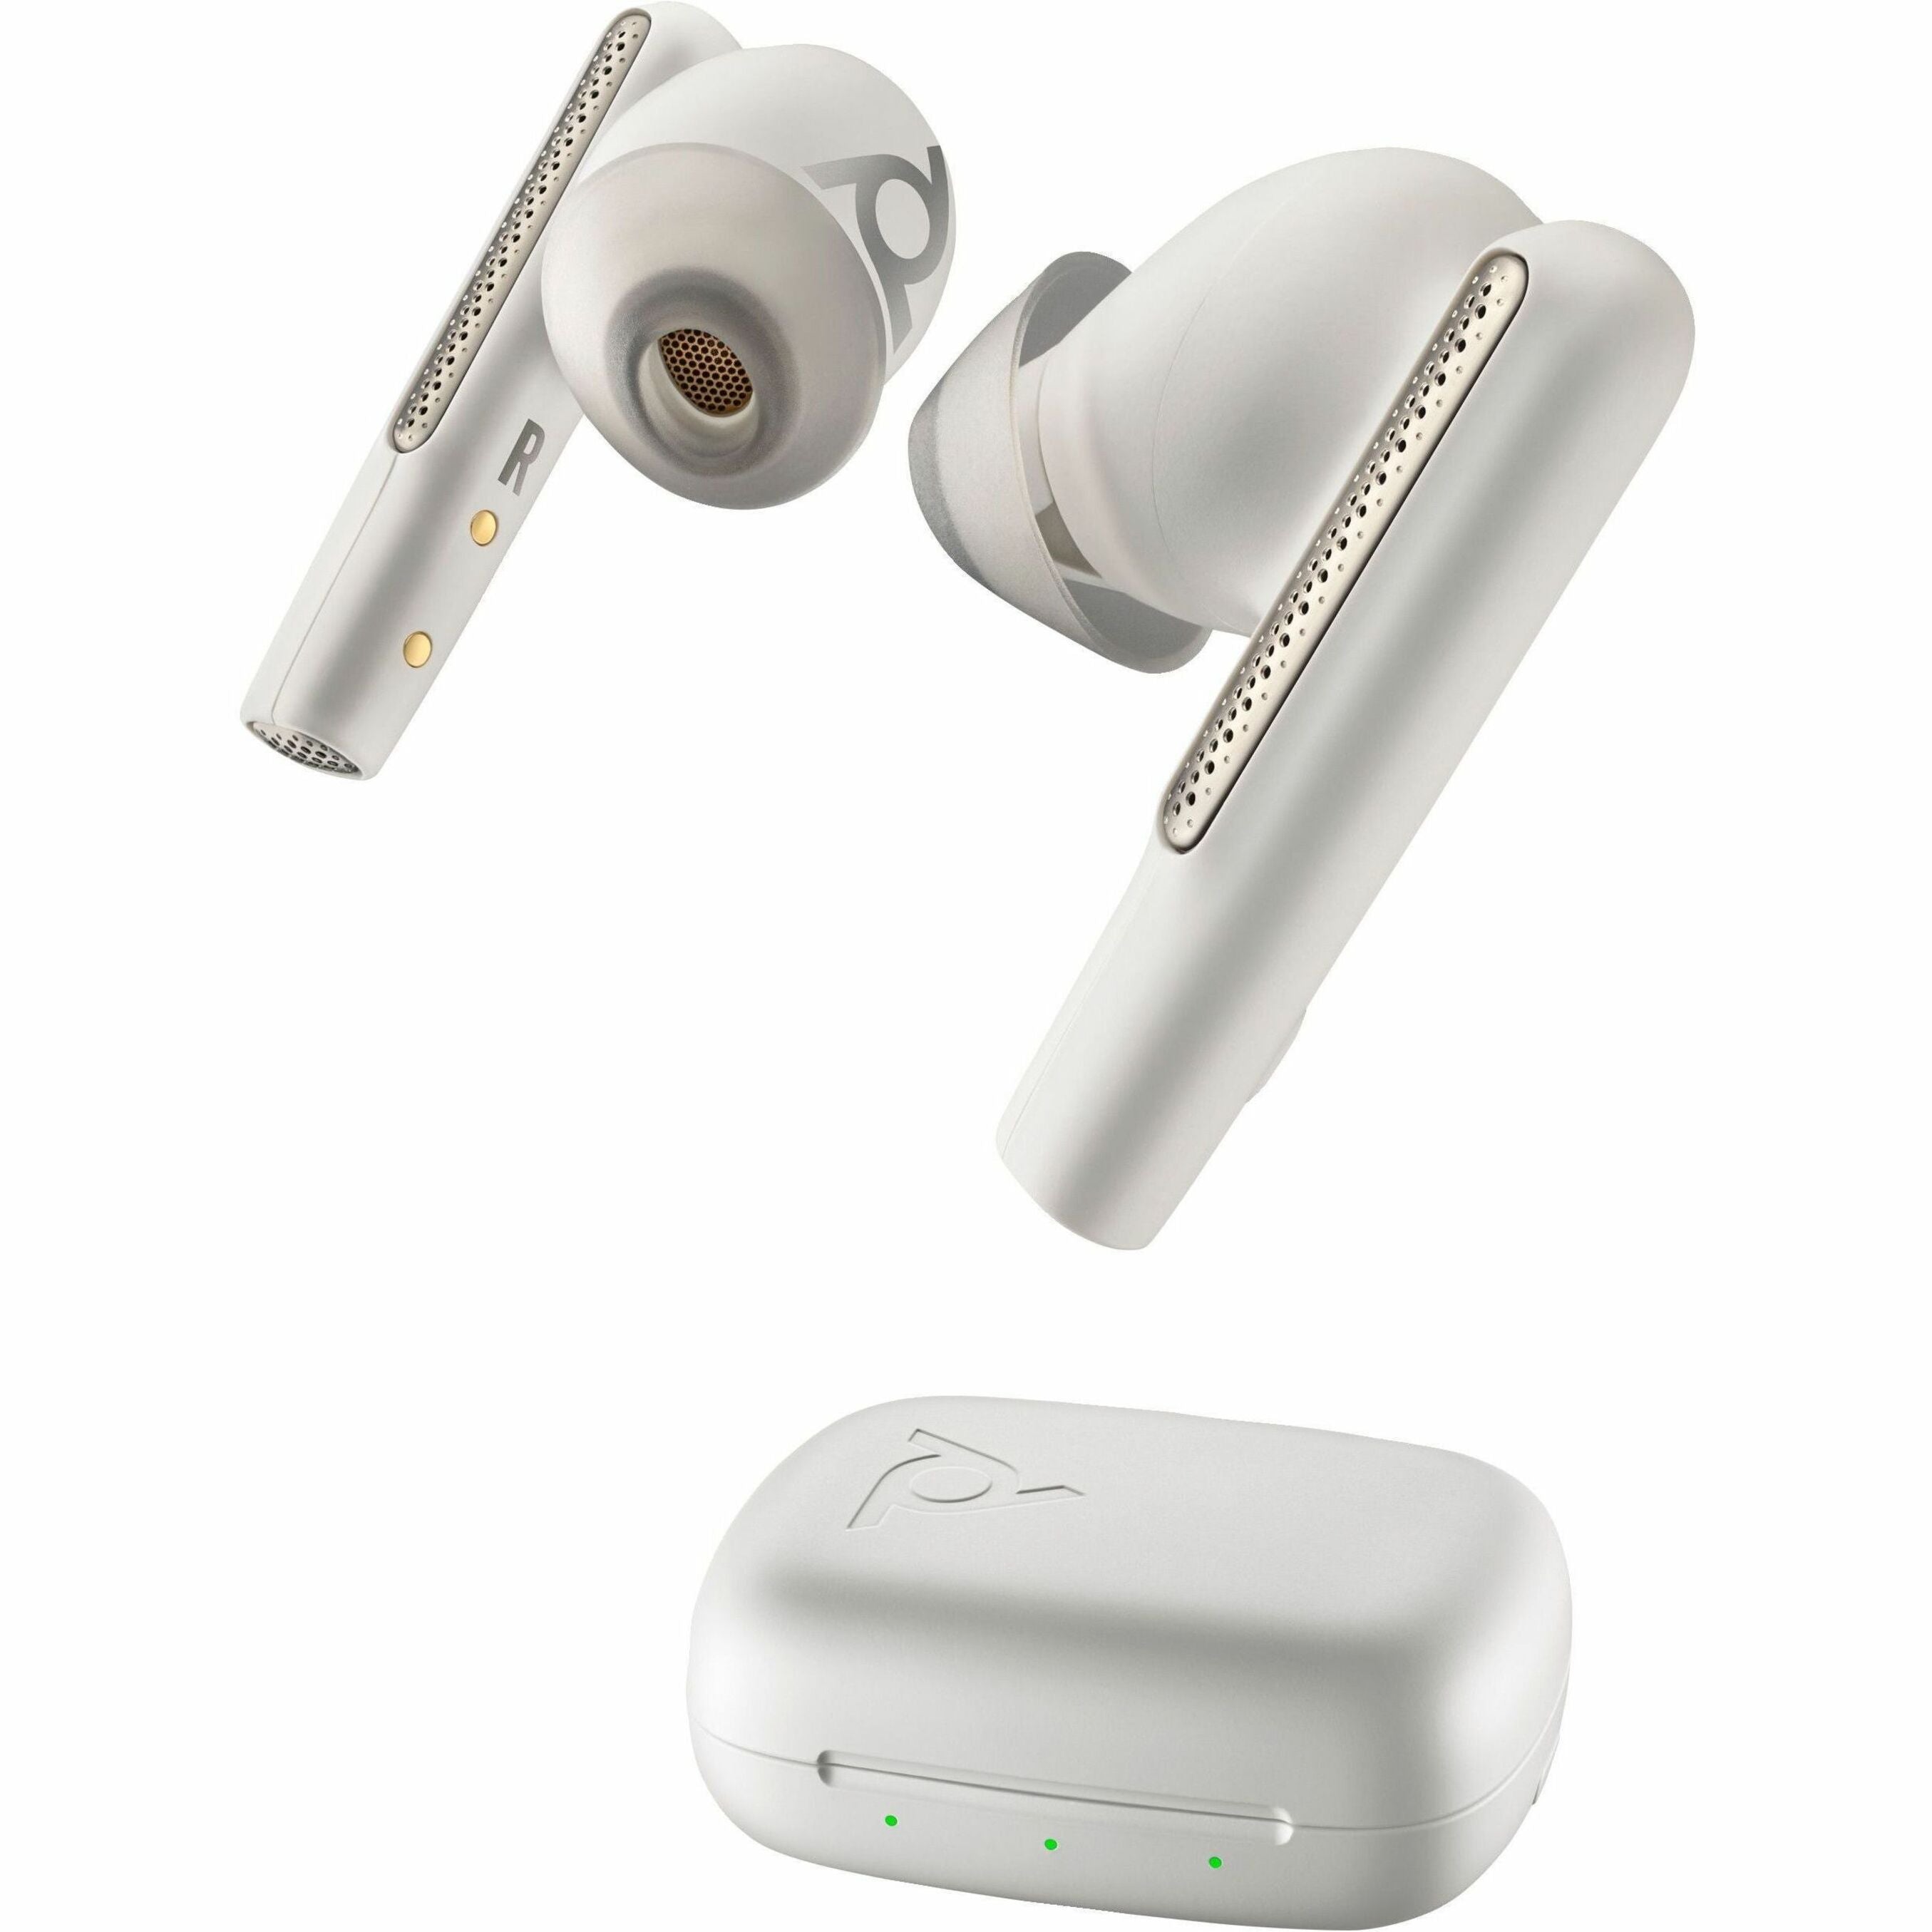 Poly 7Y8L5AA Voyager Free 60 UC M White Sand Earbuds+ BT700 USB-A Adapter + Basic Charge Case, Wireless Earset with WindSmart Technology, Lightweight, and Comfortable